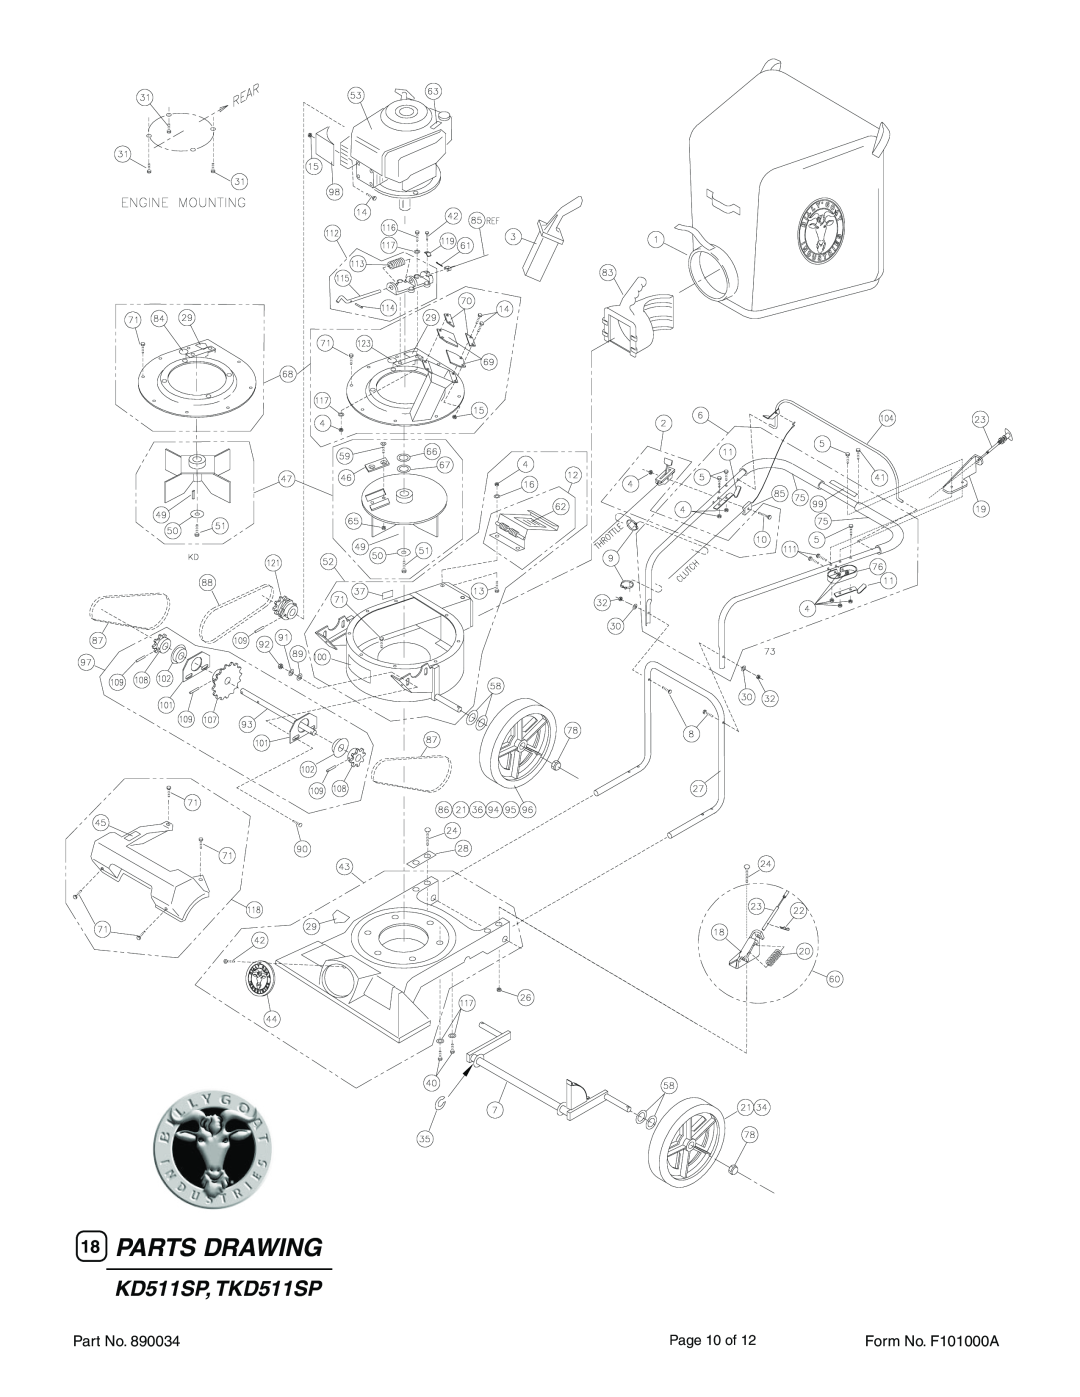 Billy Goat KD511SP, TKD511SP specifications Parts Drawing 